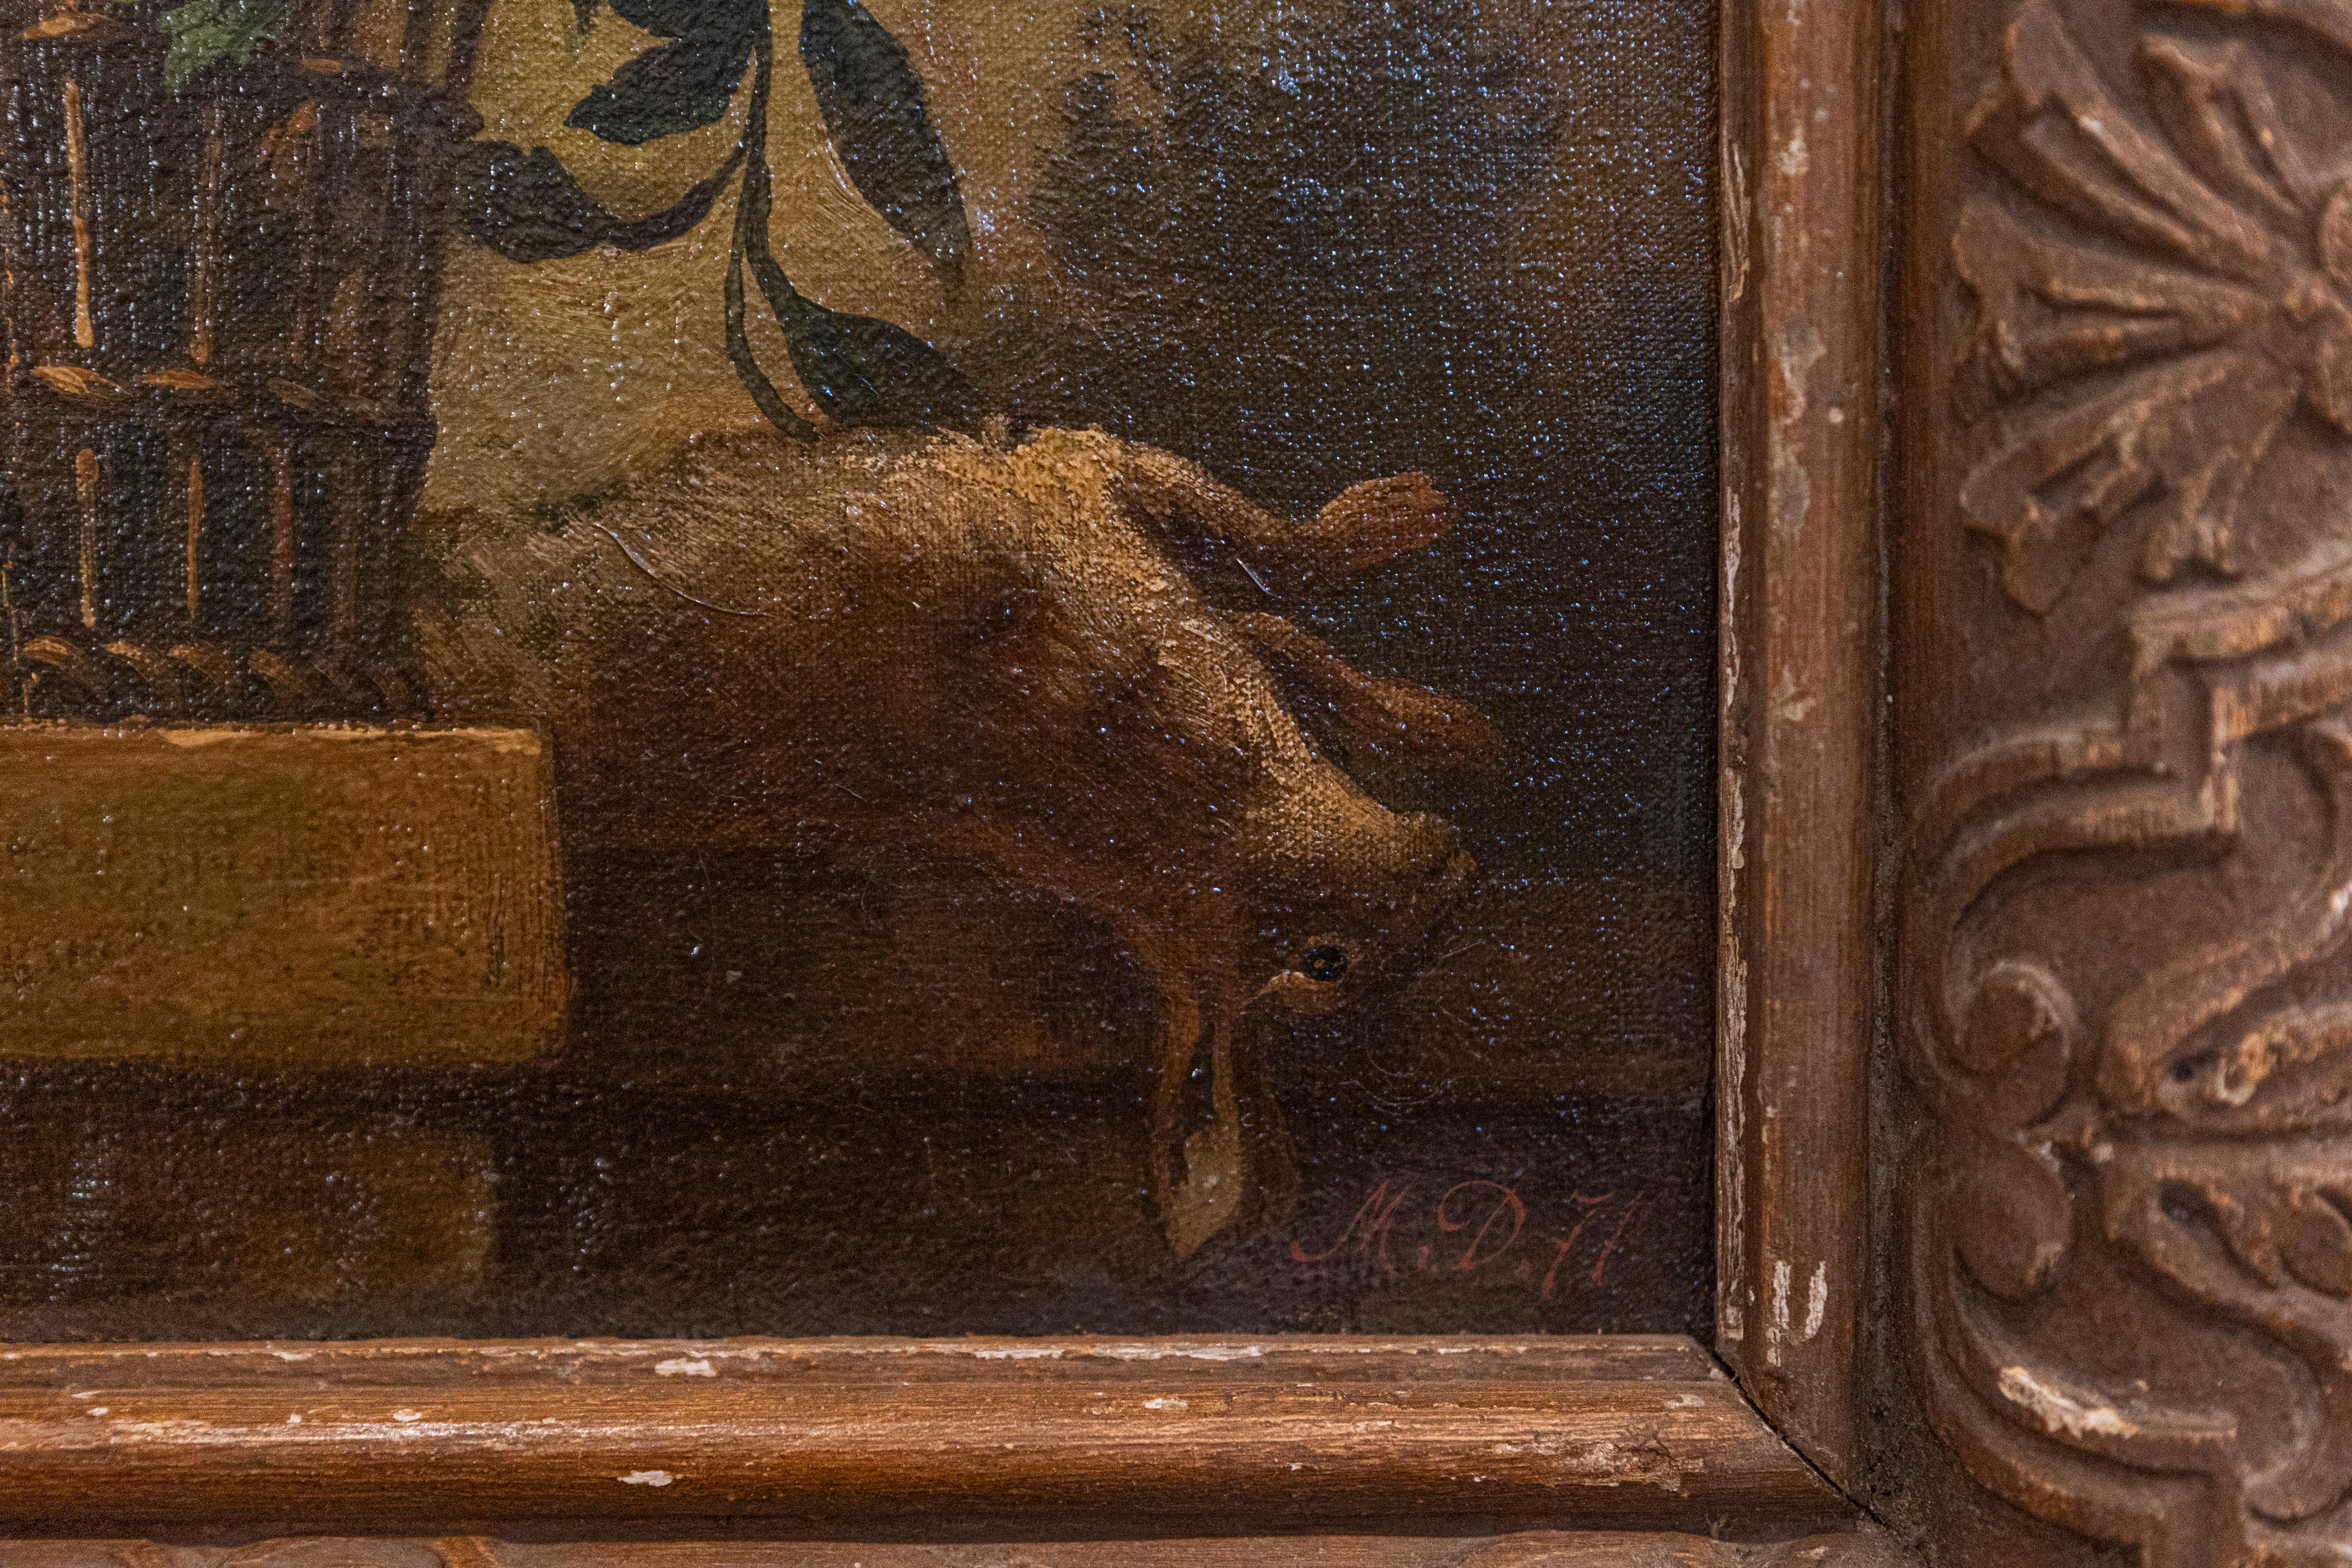 Wood French 19th Century Framed Still-life Floral Painting with Dog and Rabbit Motifs For Sale